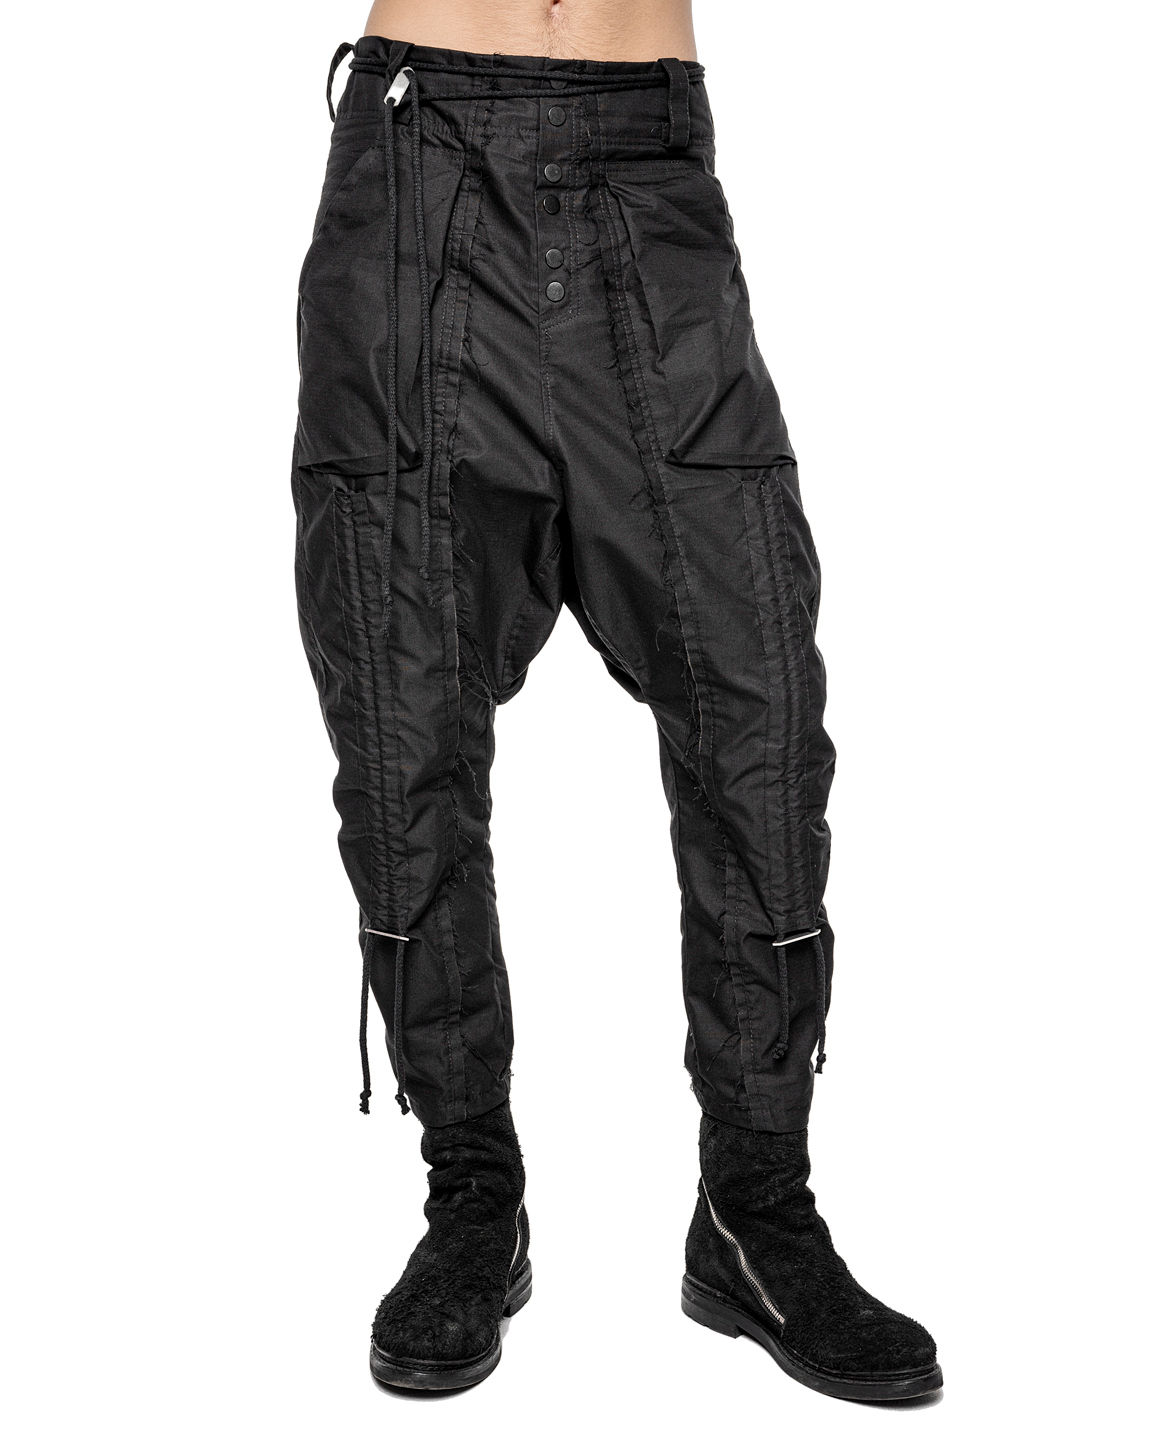 Aspect Ripstop Alternated Trousers